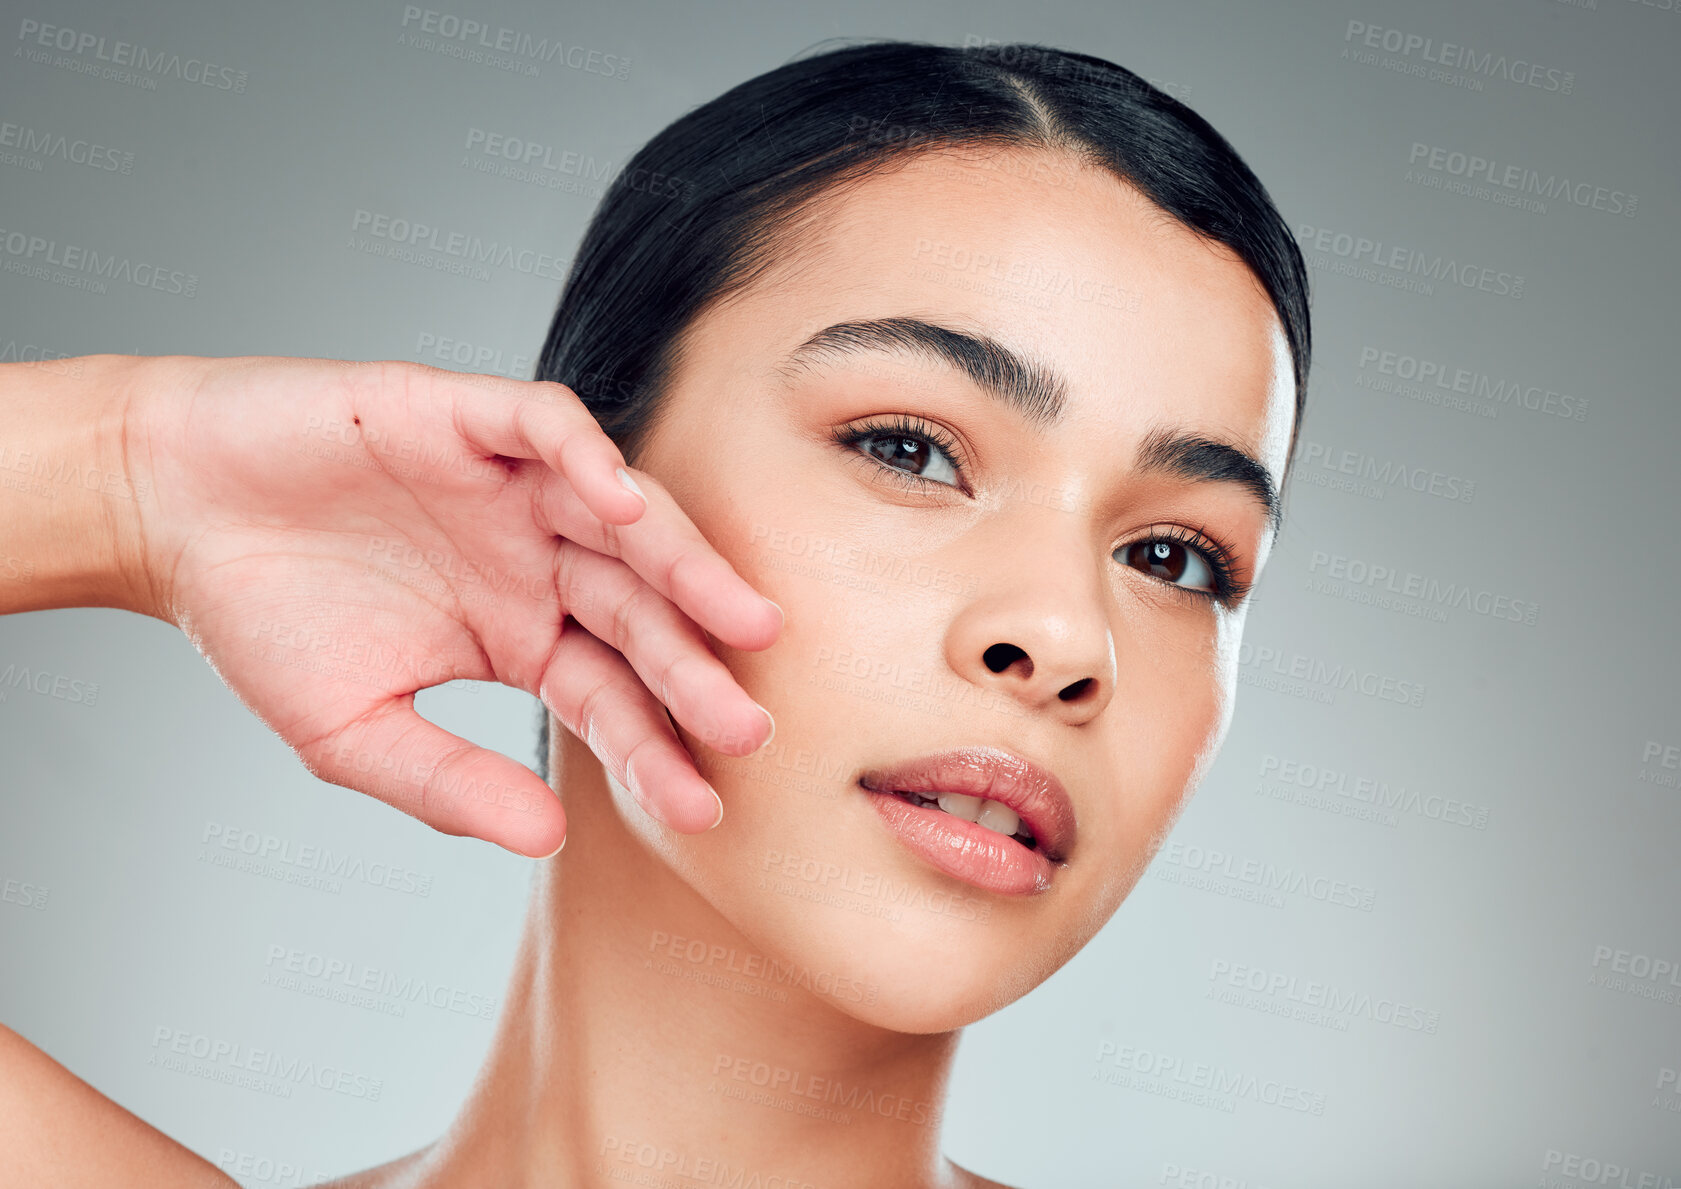 Buy stock photo Portrait of a beautiful mixed race woman touching smooth soft skin in a studio. Hispanic model with healthy natural glowing skin looking confident against grey copyspace while doing routine skincare